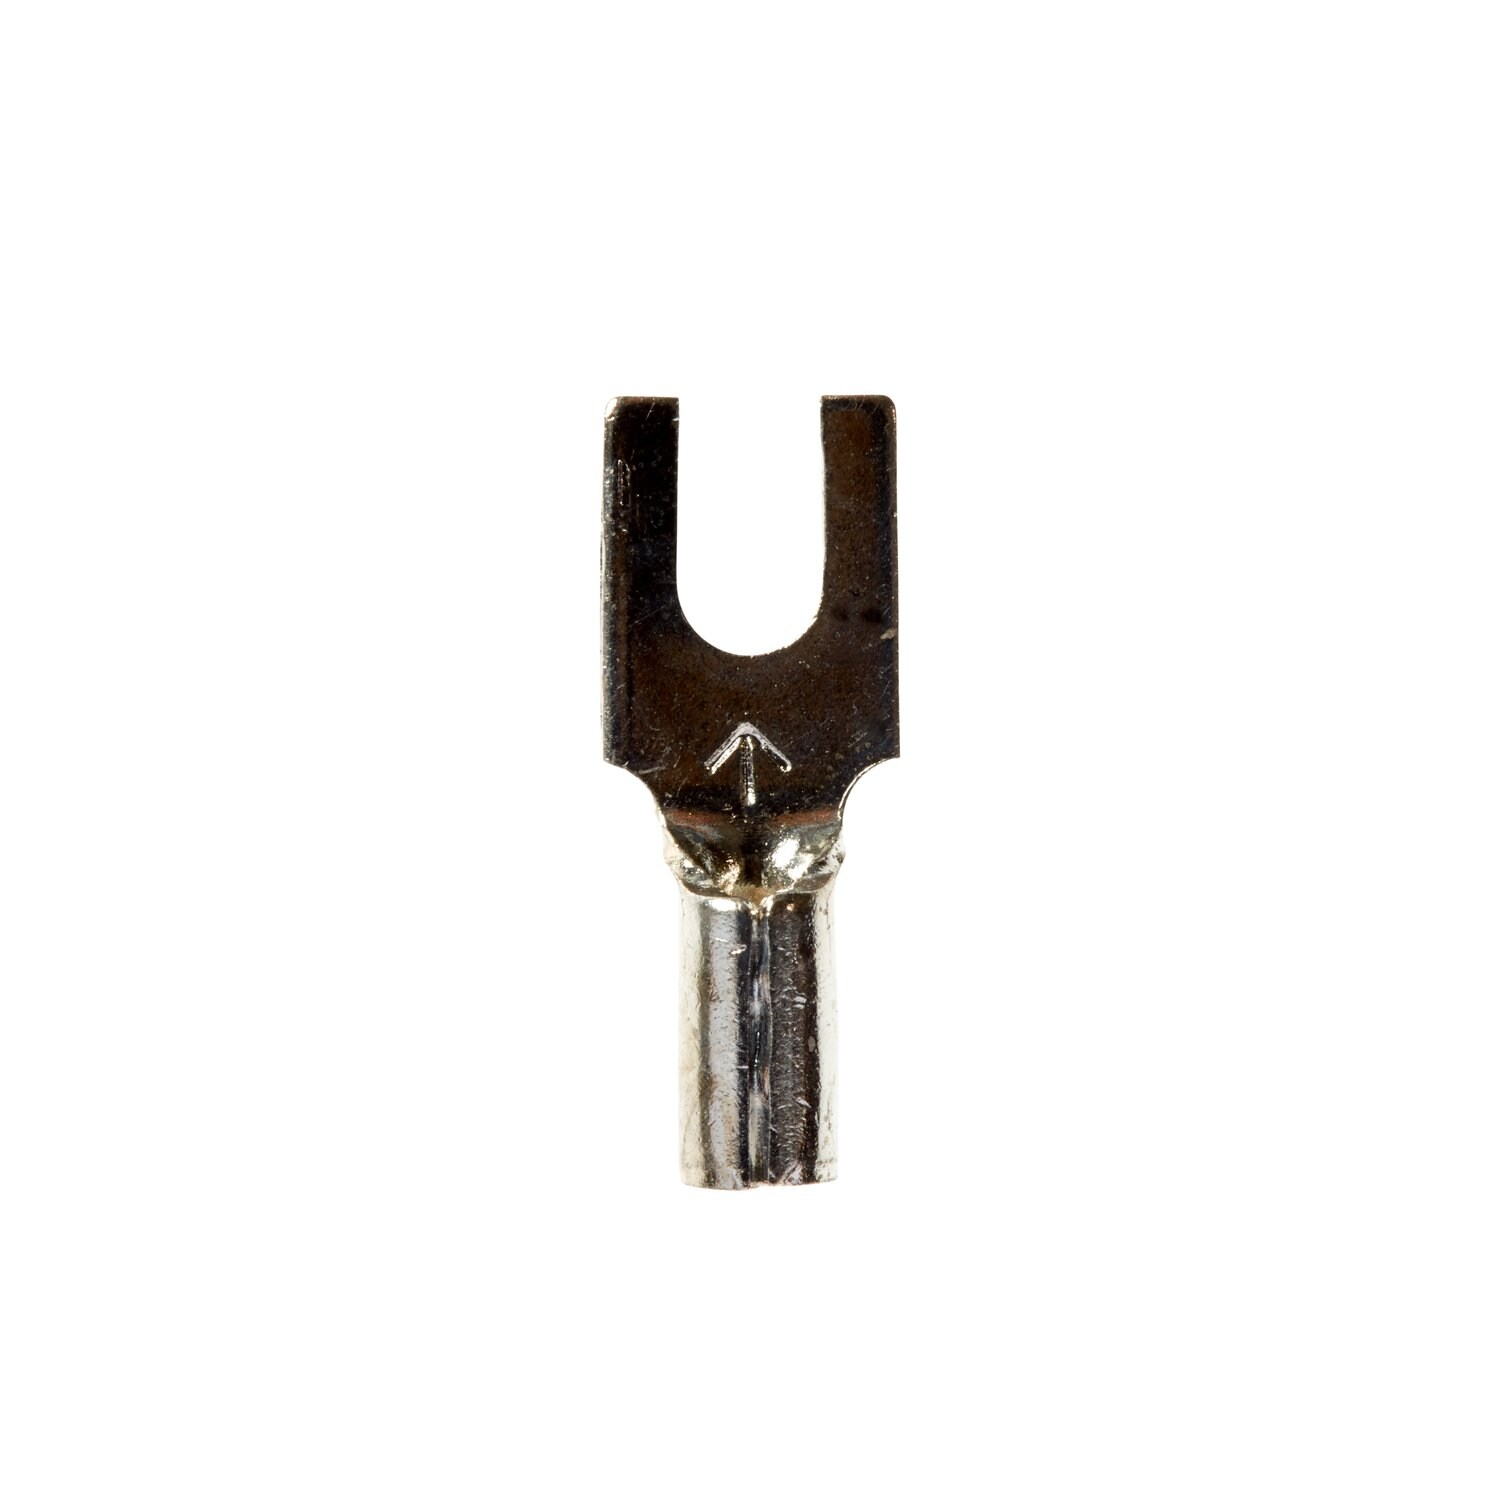 7100164174 - 3M Scotchlok Block Fork, Non-Insulated Butted Seam MU18-4FB/SK, Stud
Size 4, suitable for use in a terminal block, 1000/Case